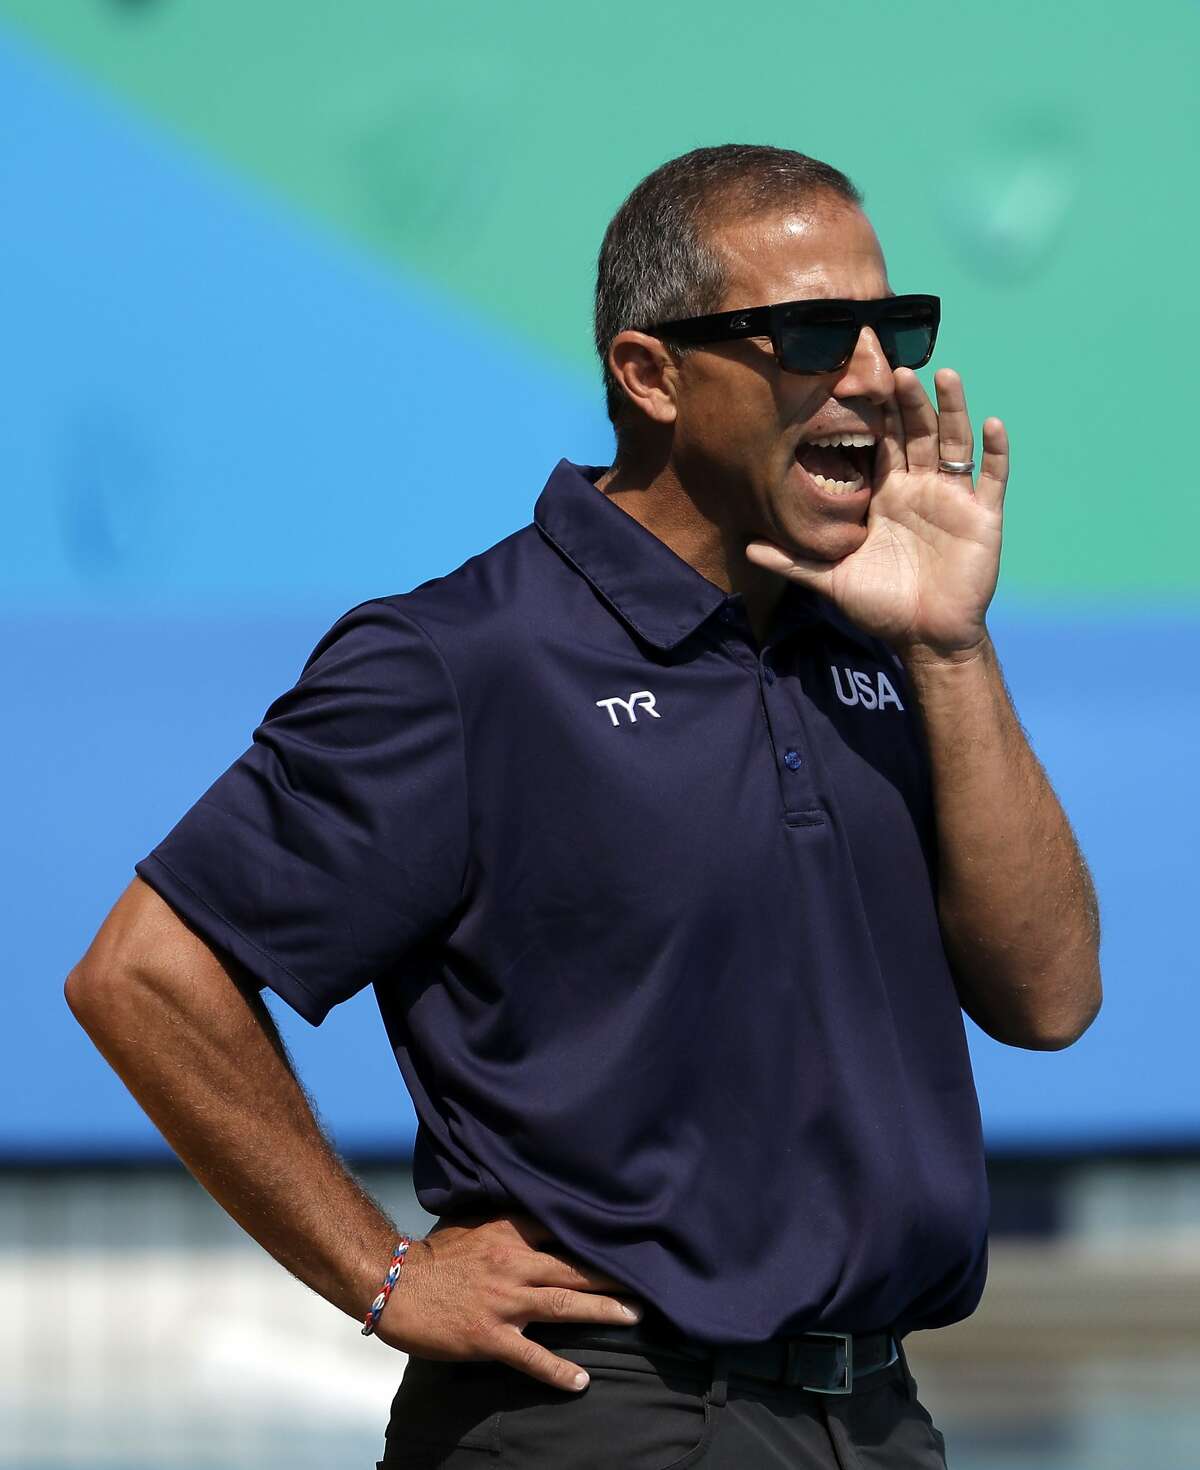 United States' coach Adam Krikorian reacts as he watches his team play against Spain during their women's water polo preliminary round match at the 2016 Summer Olympics in Rio de Janeiro, Brazil, Tuesday, Aug. 9, 2016. 